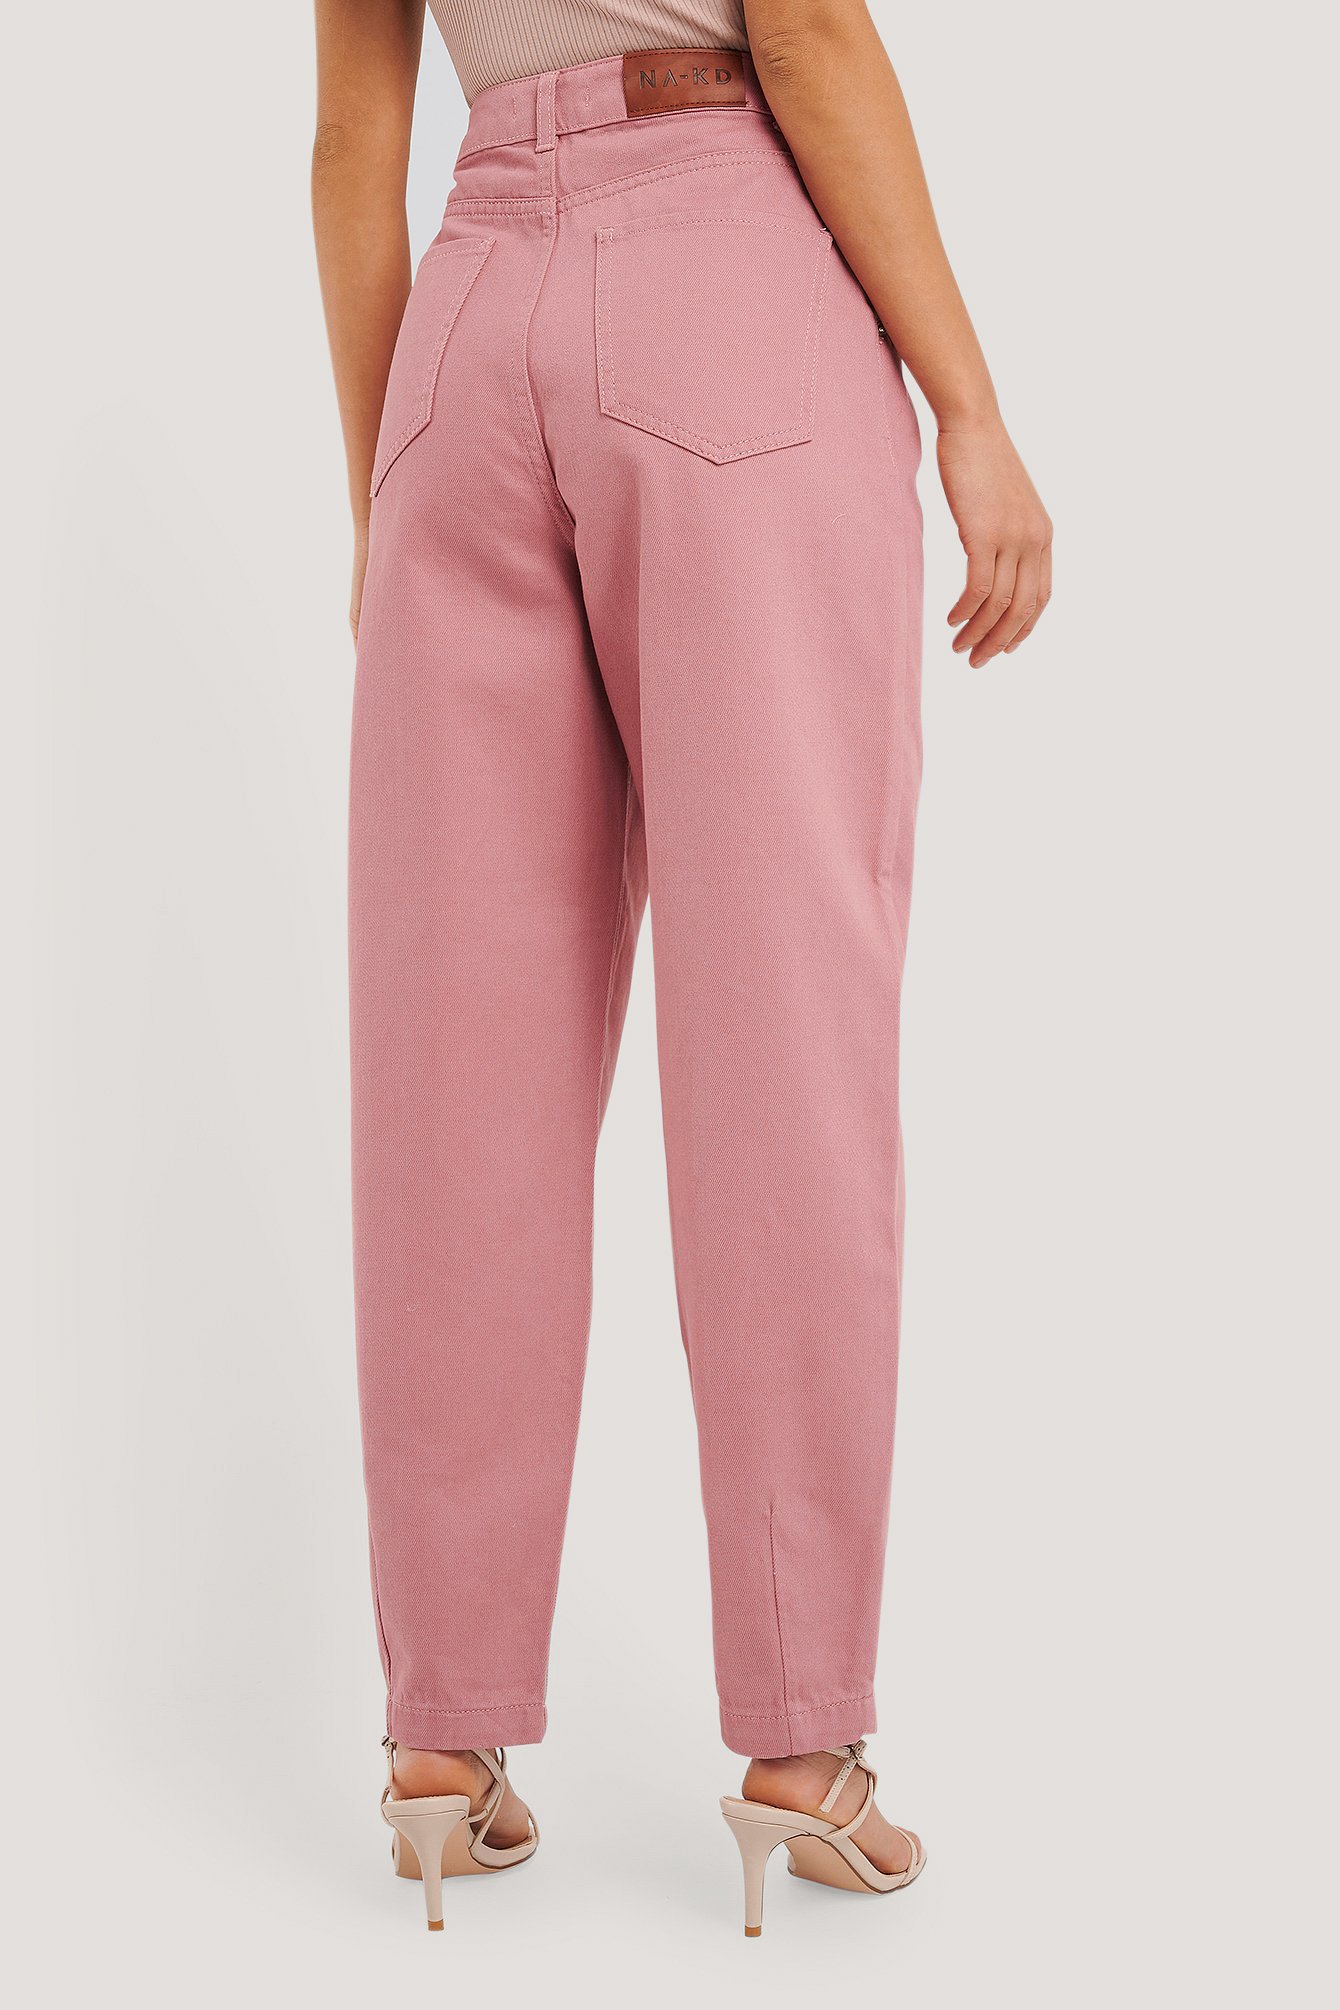 Dusty Rose Front Dart Slouchy Jeans